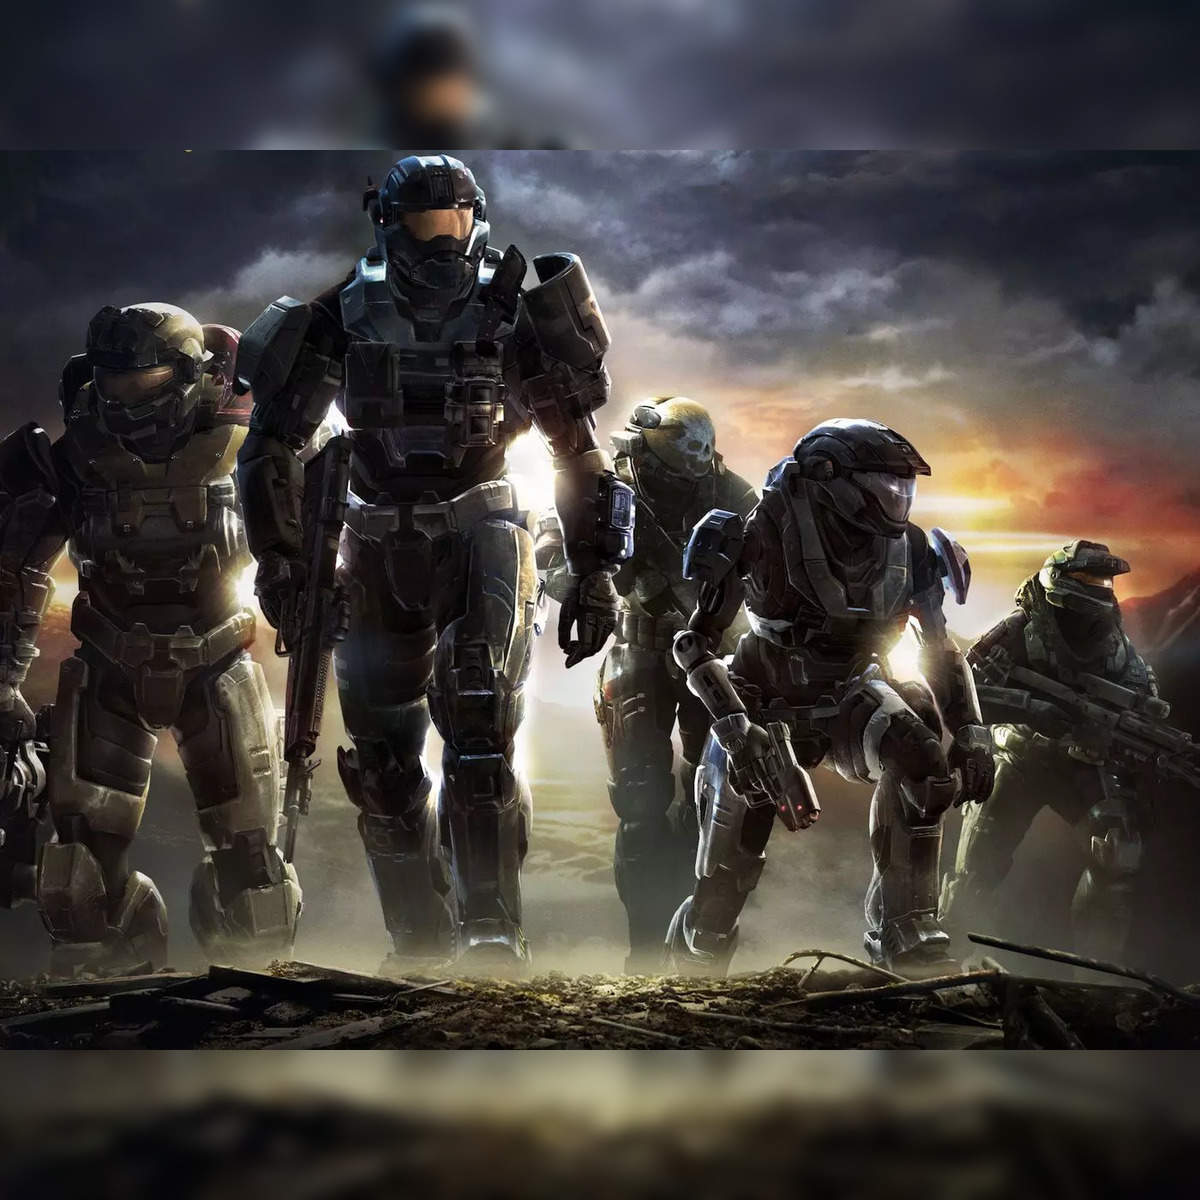 Halo: Season 2 First Look Trailer Reveals February 8 Streaming